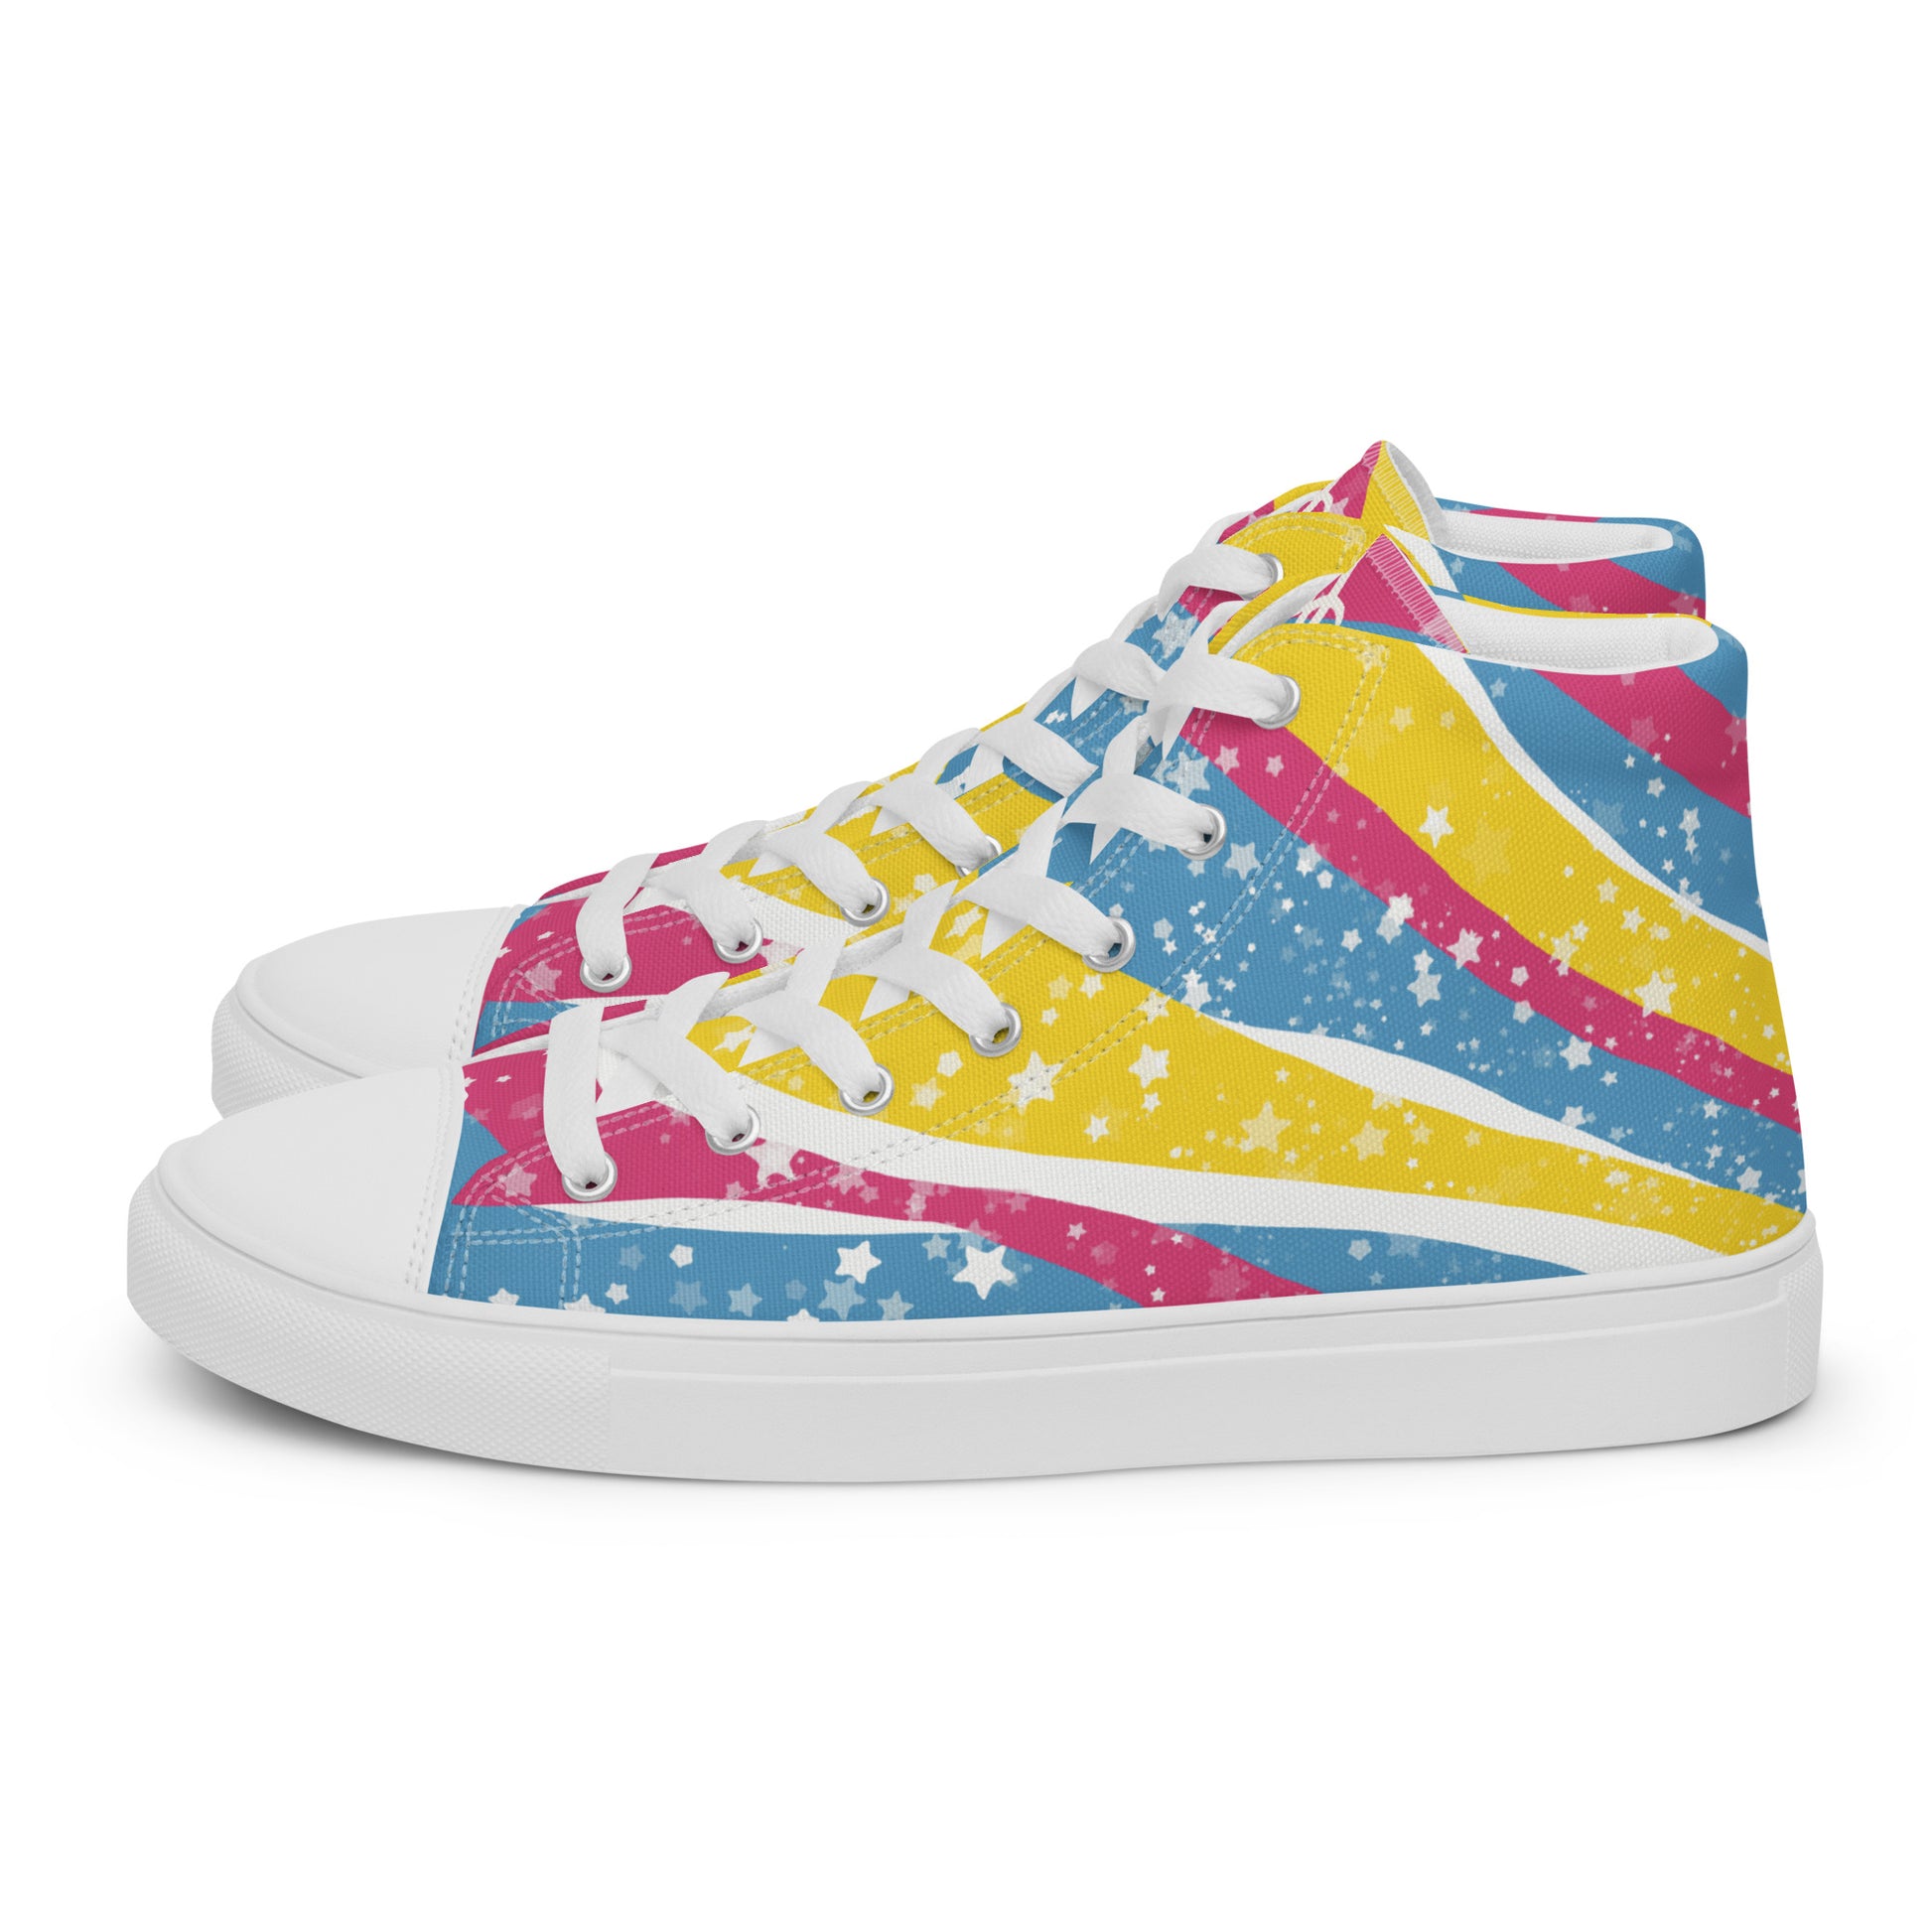 Left view: a pair of high top shoes with pink, yellow, and blue ribbons that get larger from heel to laces, white stars, and the Aras Sivad logo on the tongue.